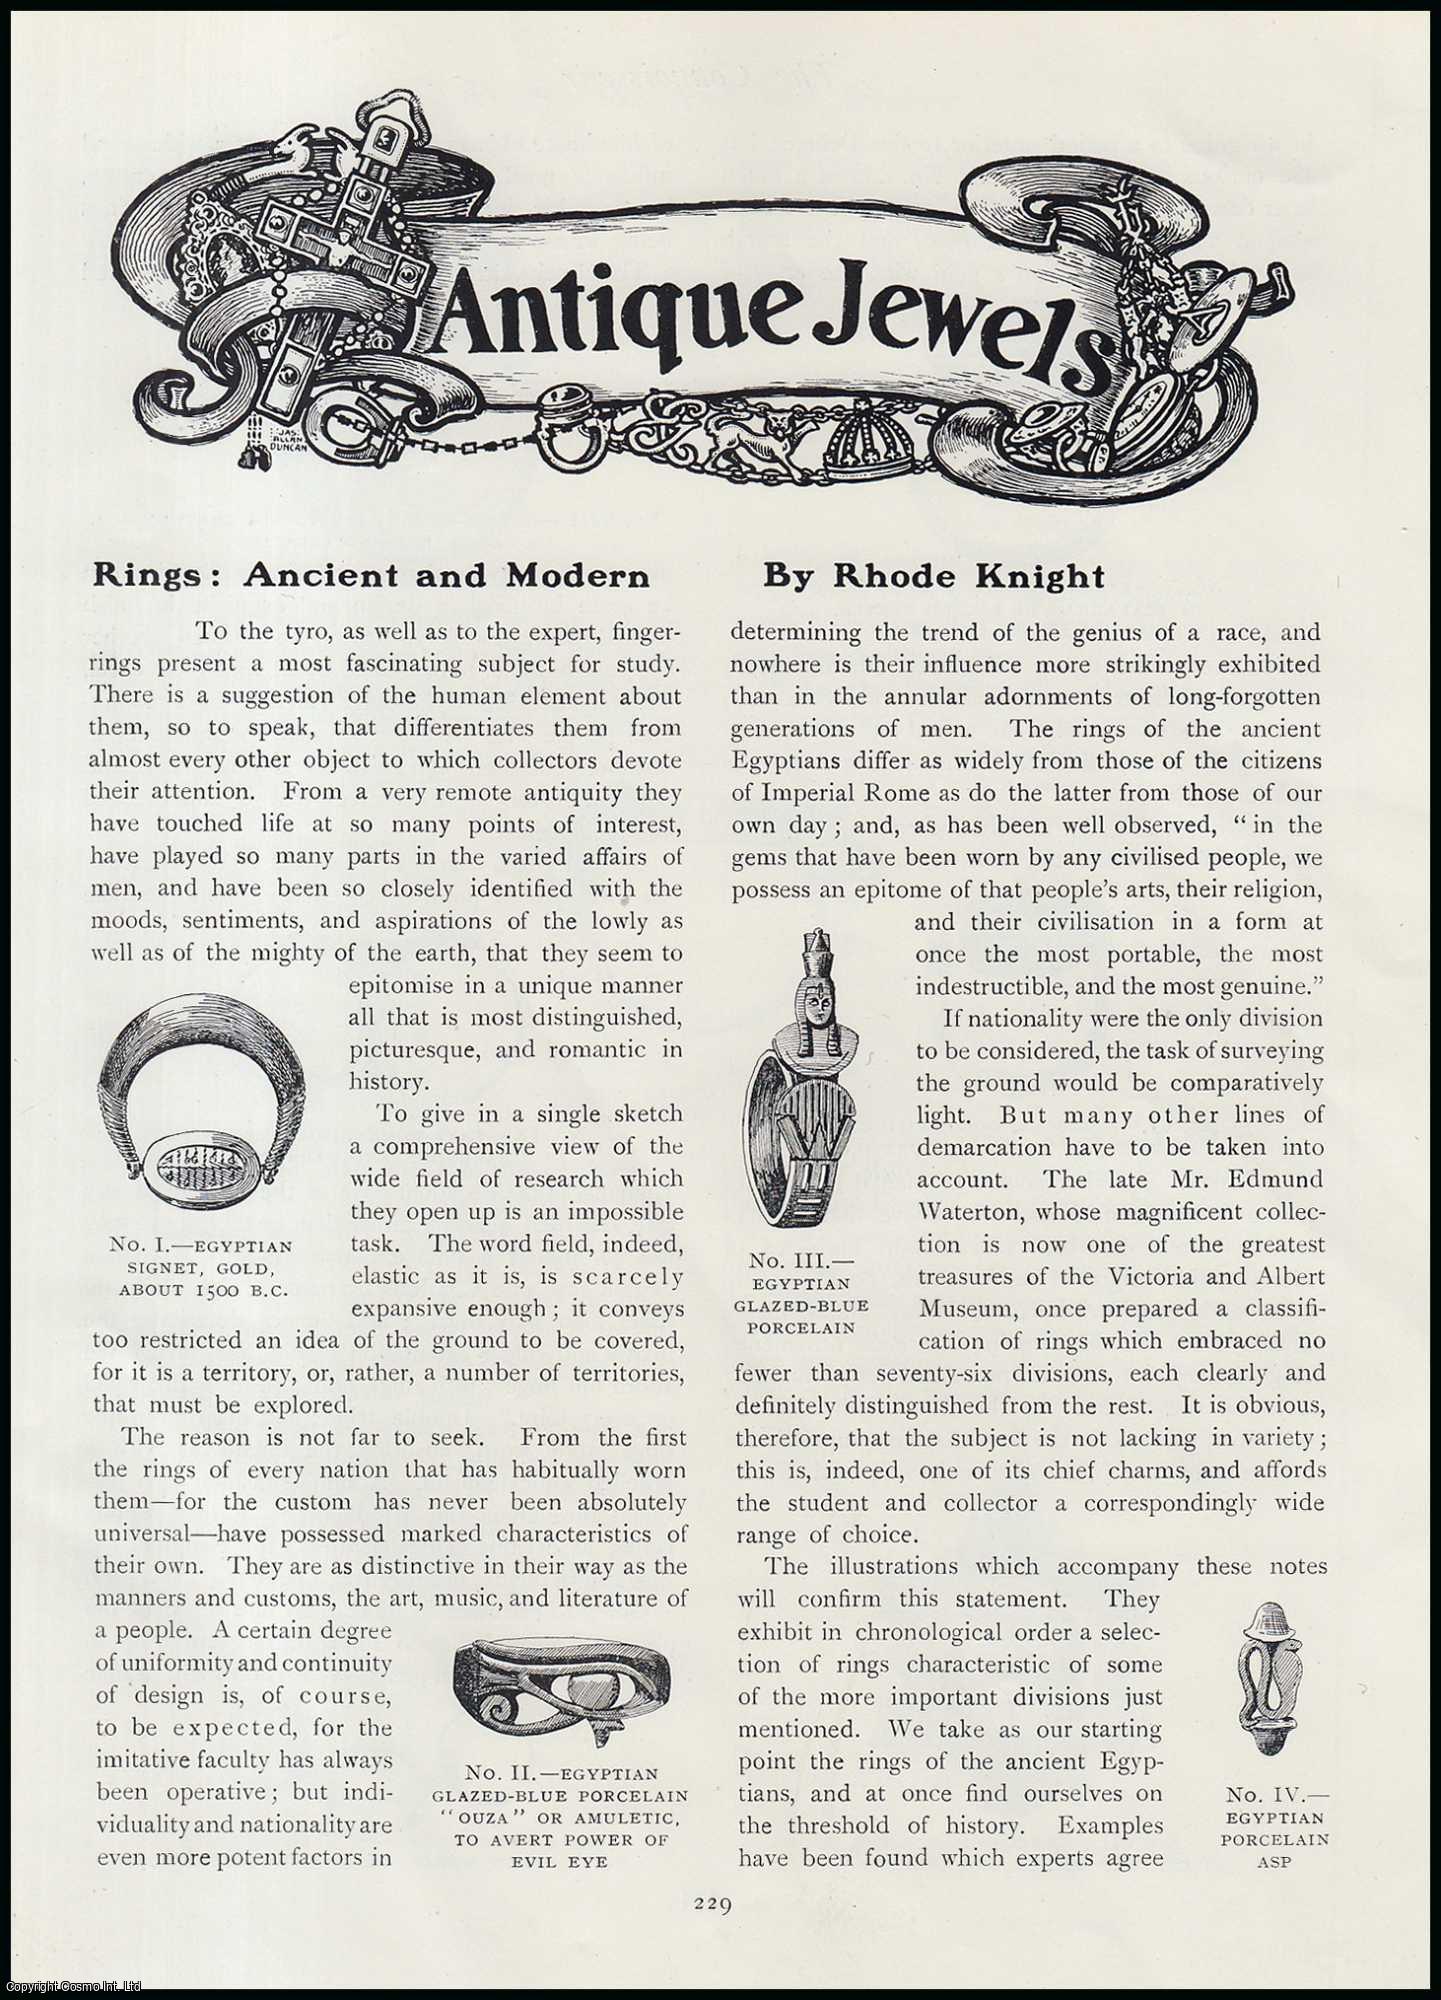 Rhode Knight - Rings for your Fingers : Ancient and Modern. An original article from The Connoisseur, 1911.